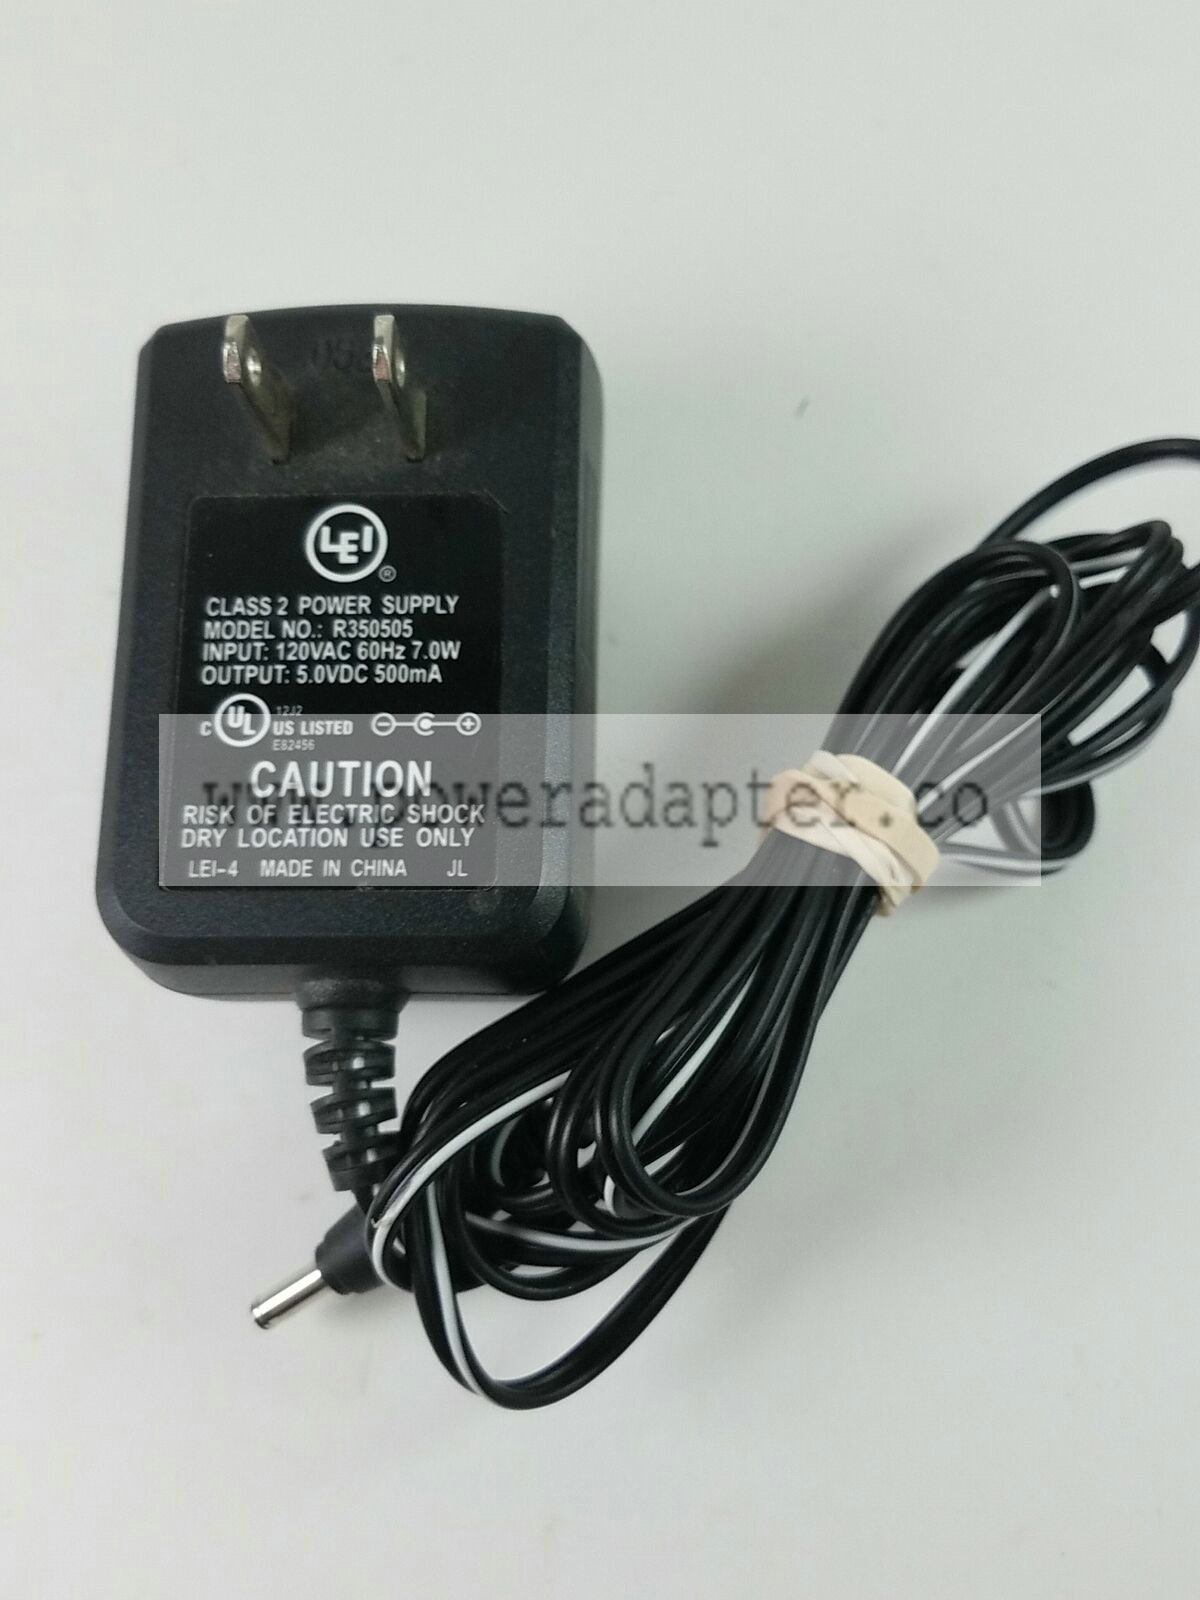 LEI R350505 AC Power Supply Adapter 5VDC 500mA Brand: LEI MPN: R350505 Model: R350505 Output Voltage: 5VDC UPC: D